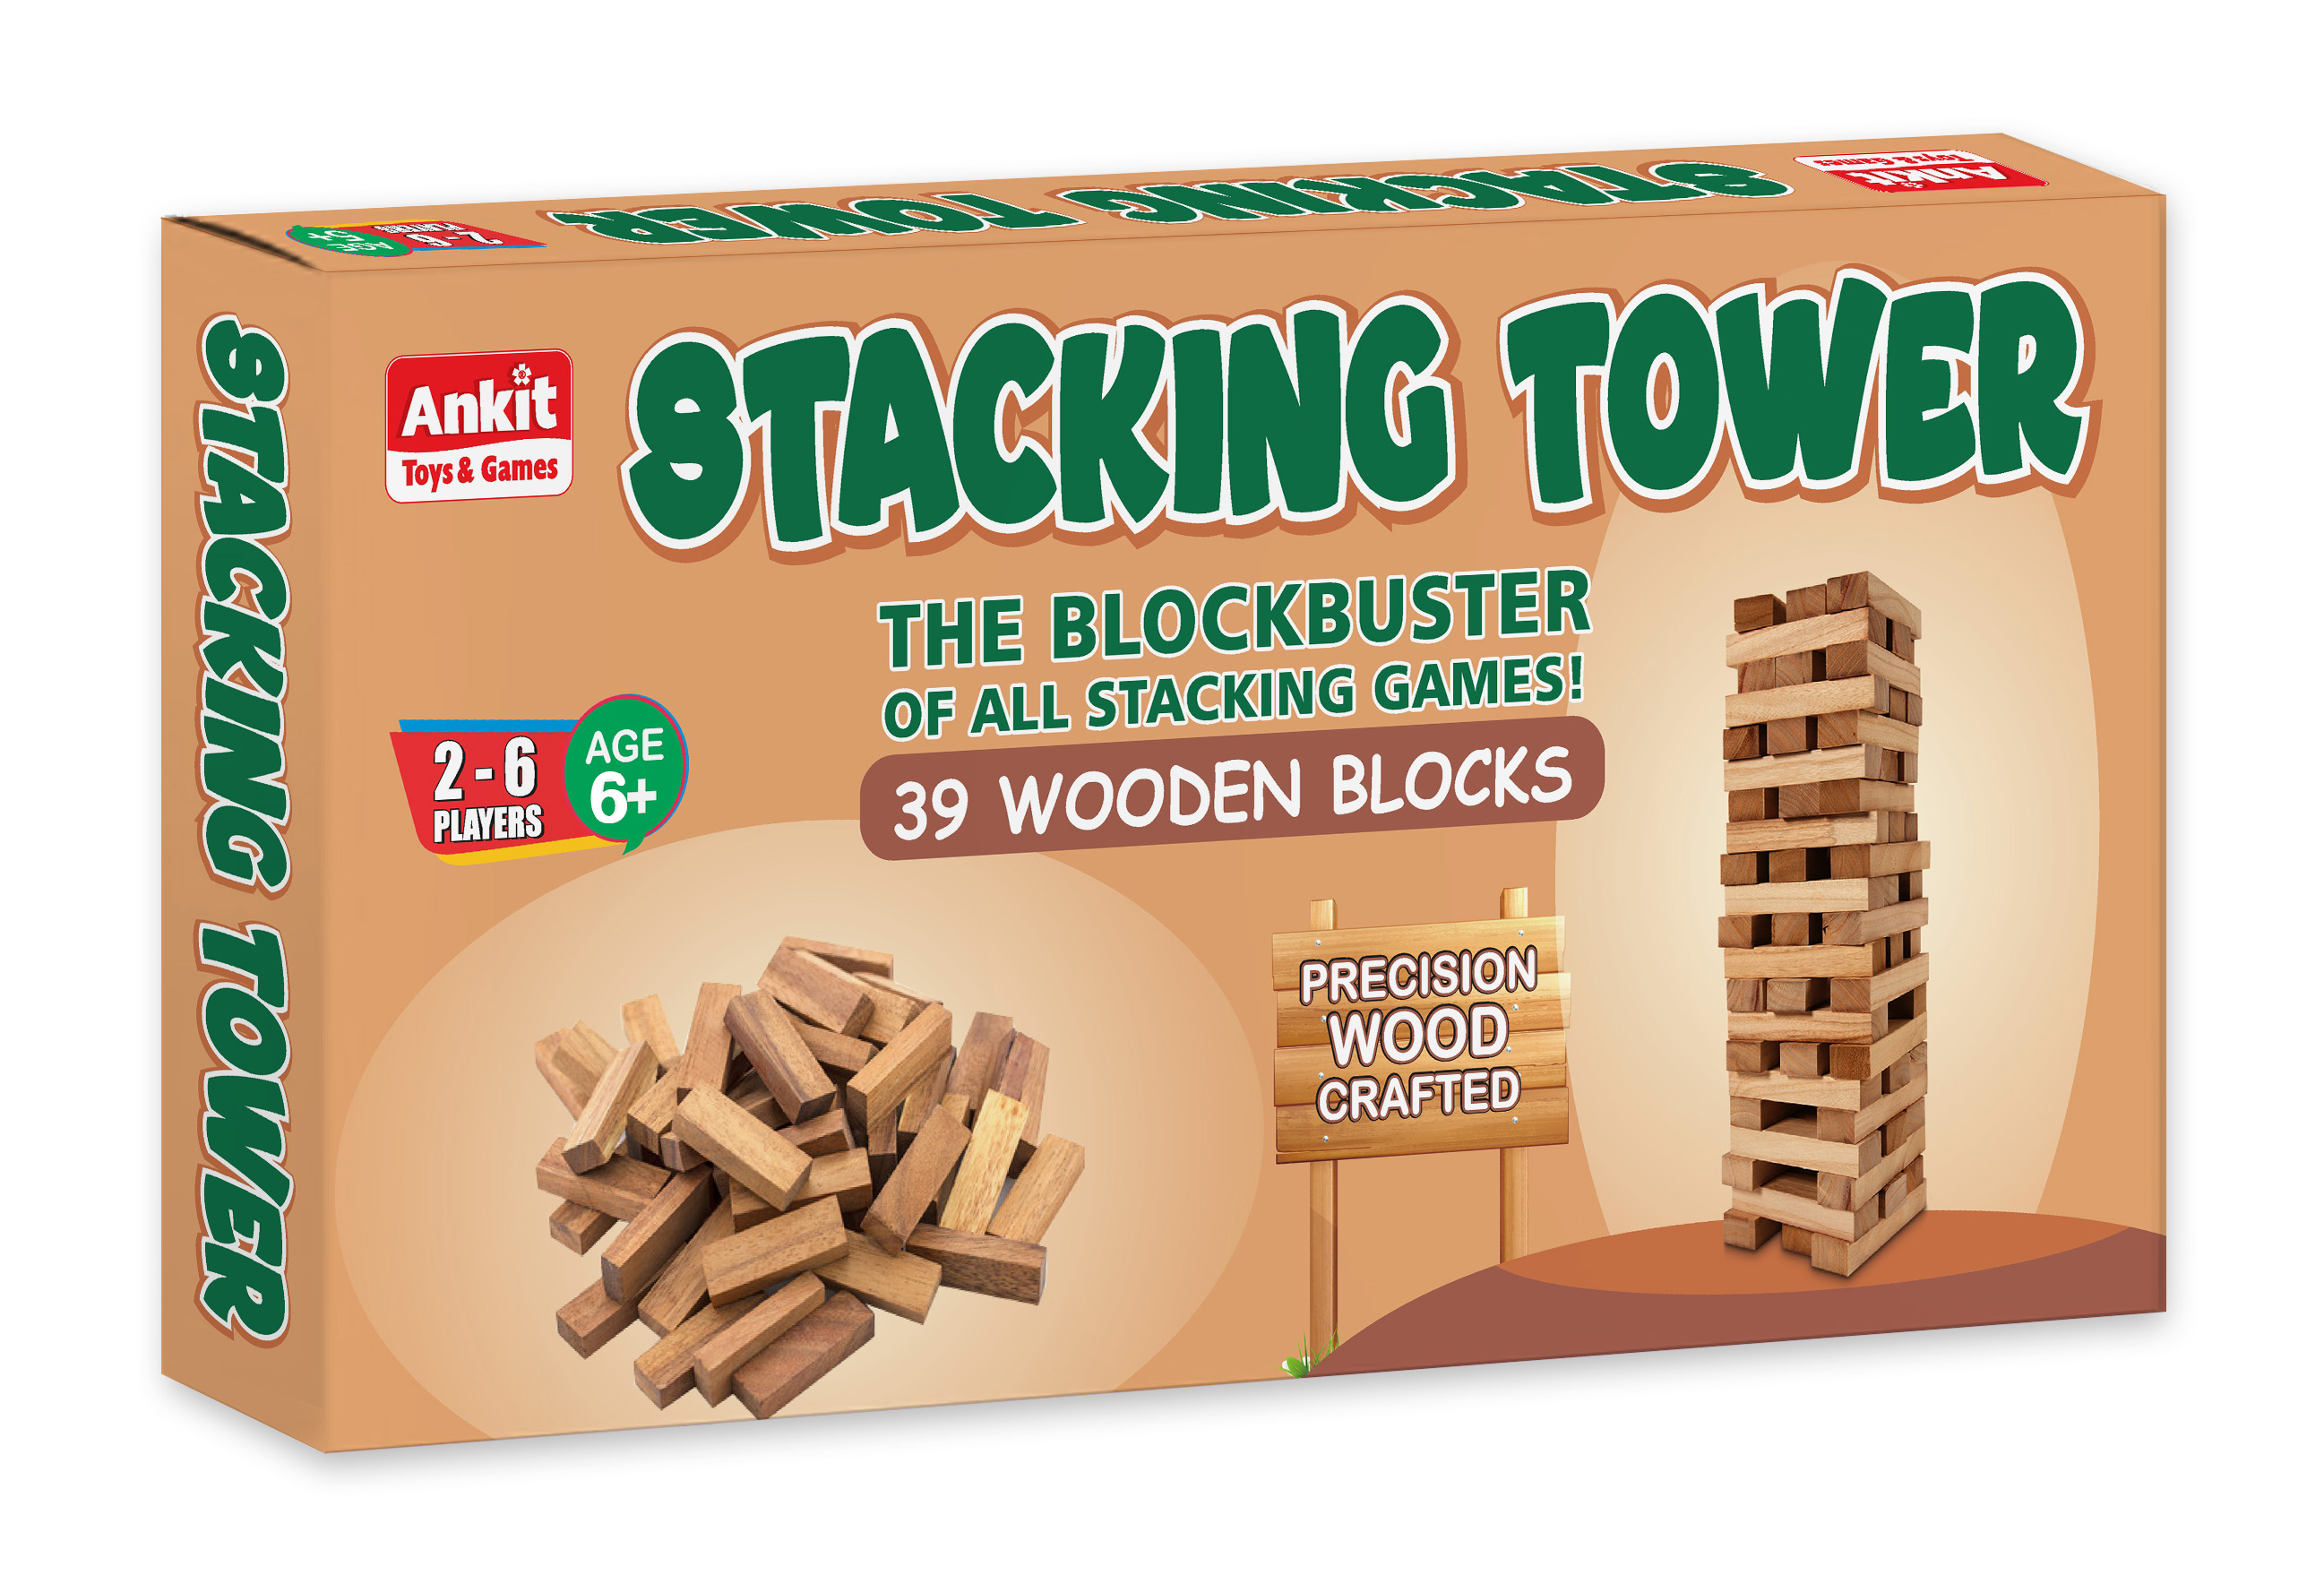 STACKING TOWER